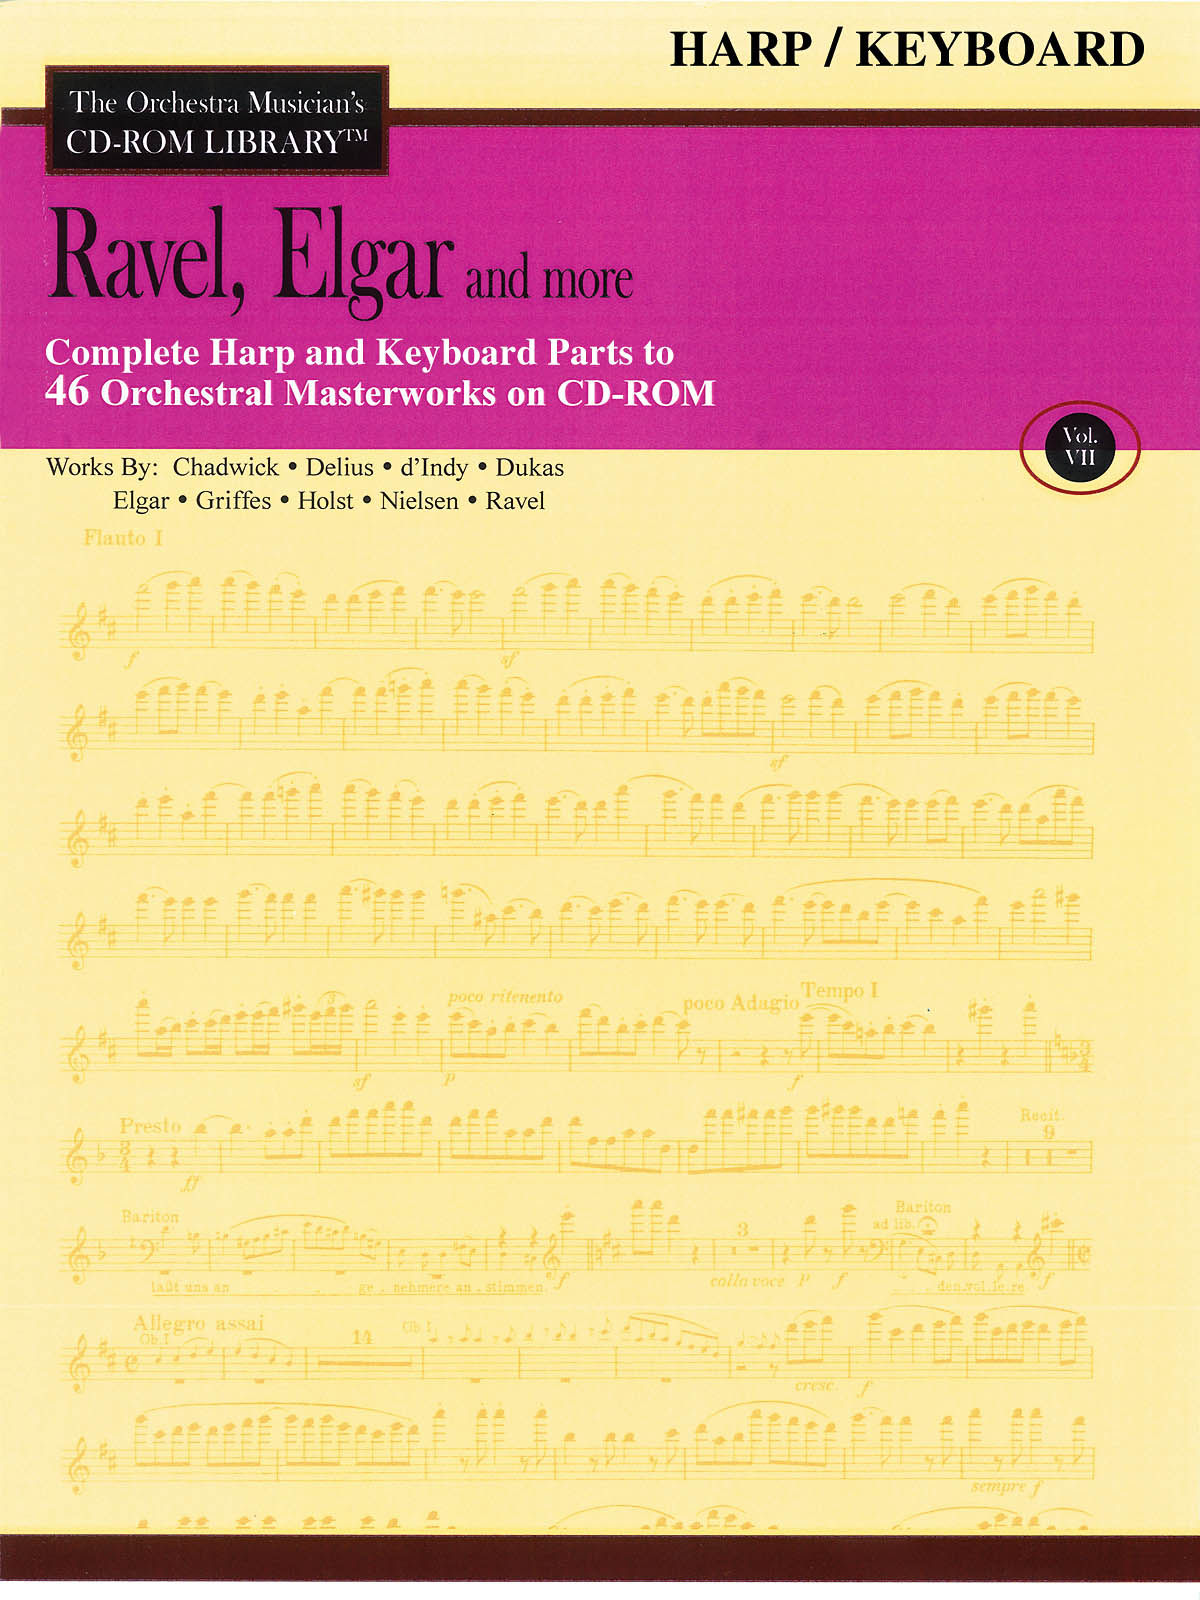 Ravel, Elgar and More - Volume 7(The Orchestra Musician's CD-ROM Library)